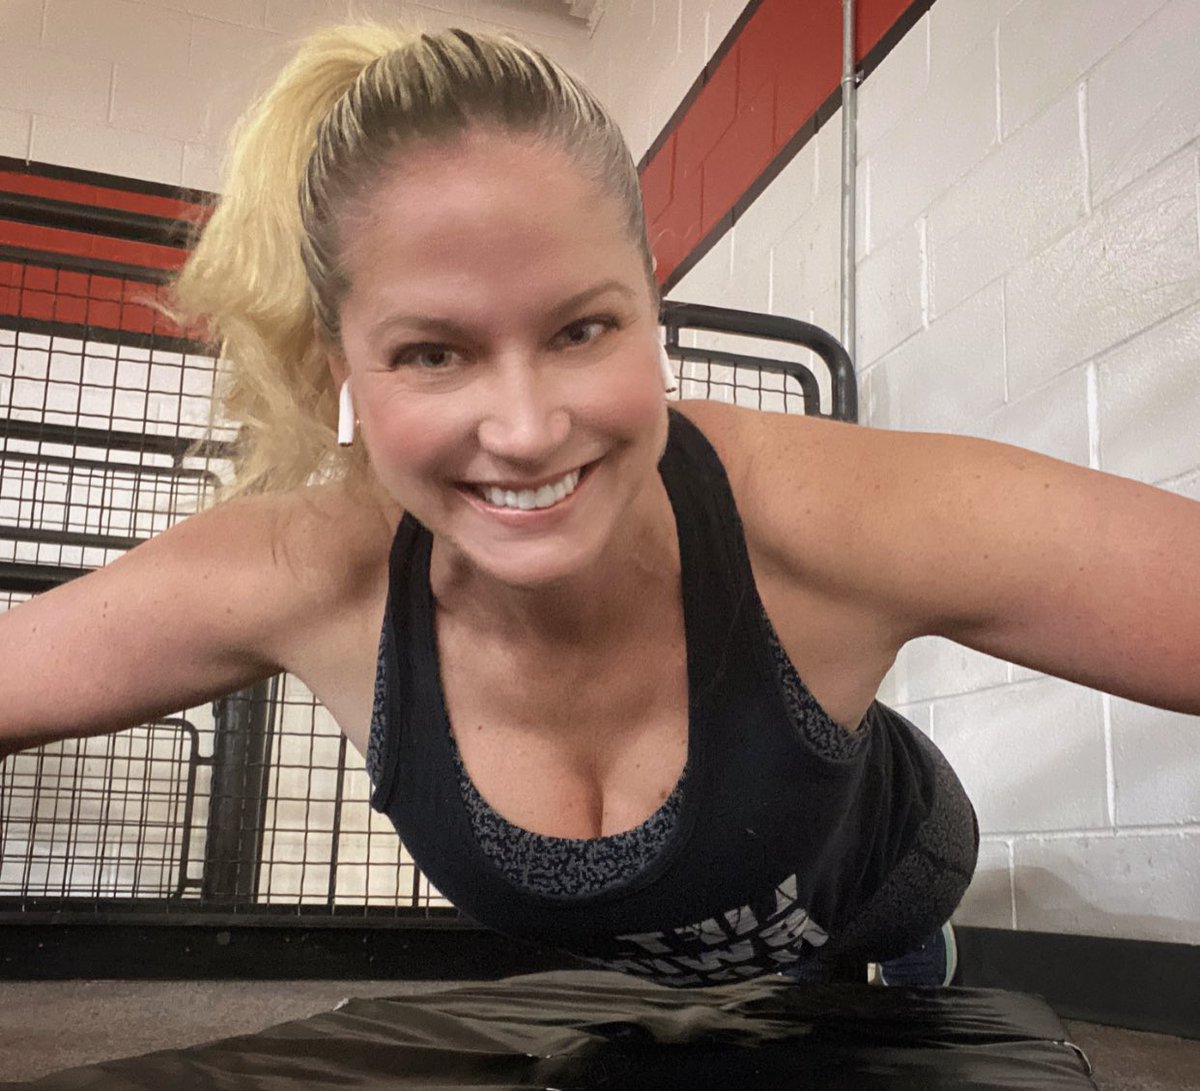 I devoted my 100 push-ups today to the challenge for raising awareness for veterans and first responders suicide prevention.  💪🏻🇺🇸❤️🙏🏻 #pushups #pushupchallenge #veterans #saturdaymotivation #fitness #godblessourveterans #firstresponders